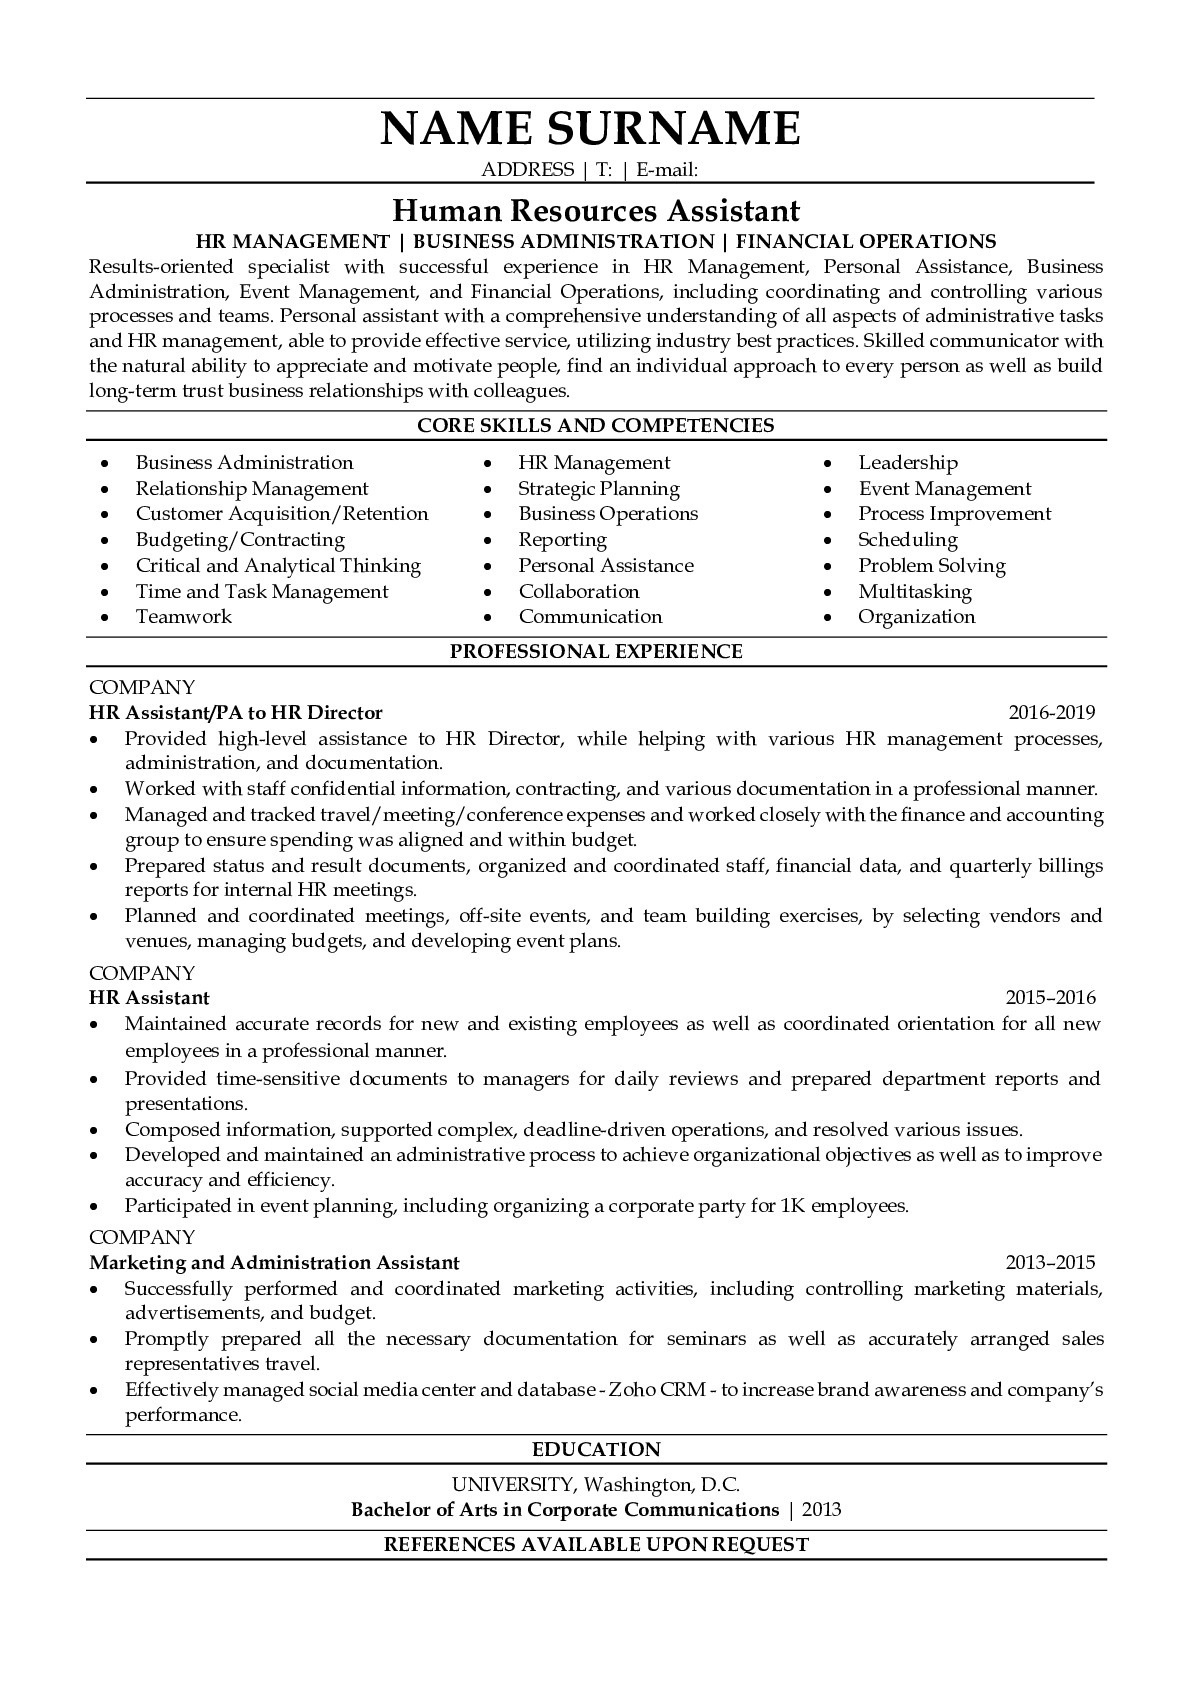 Resume Example for Human Resources Assistant